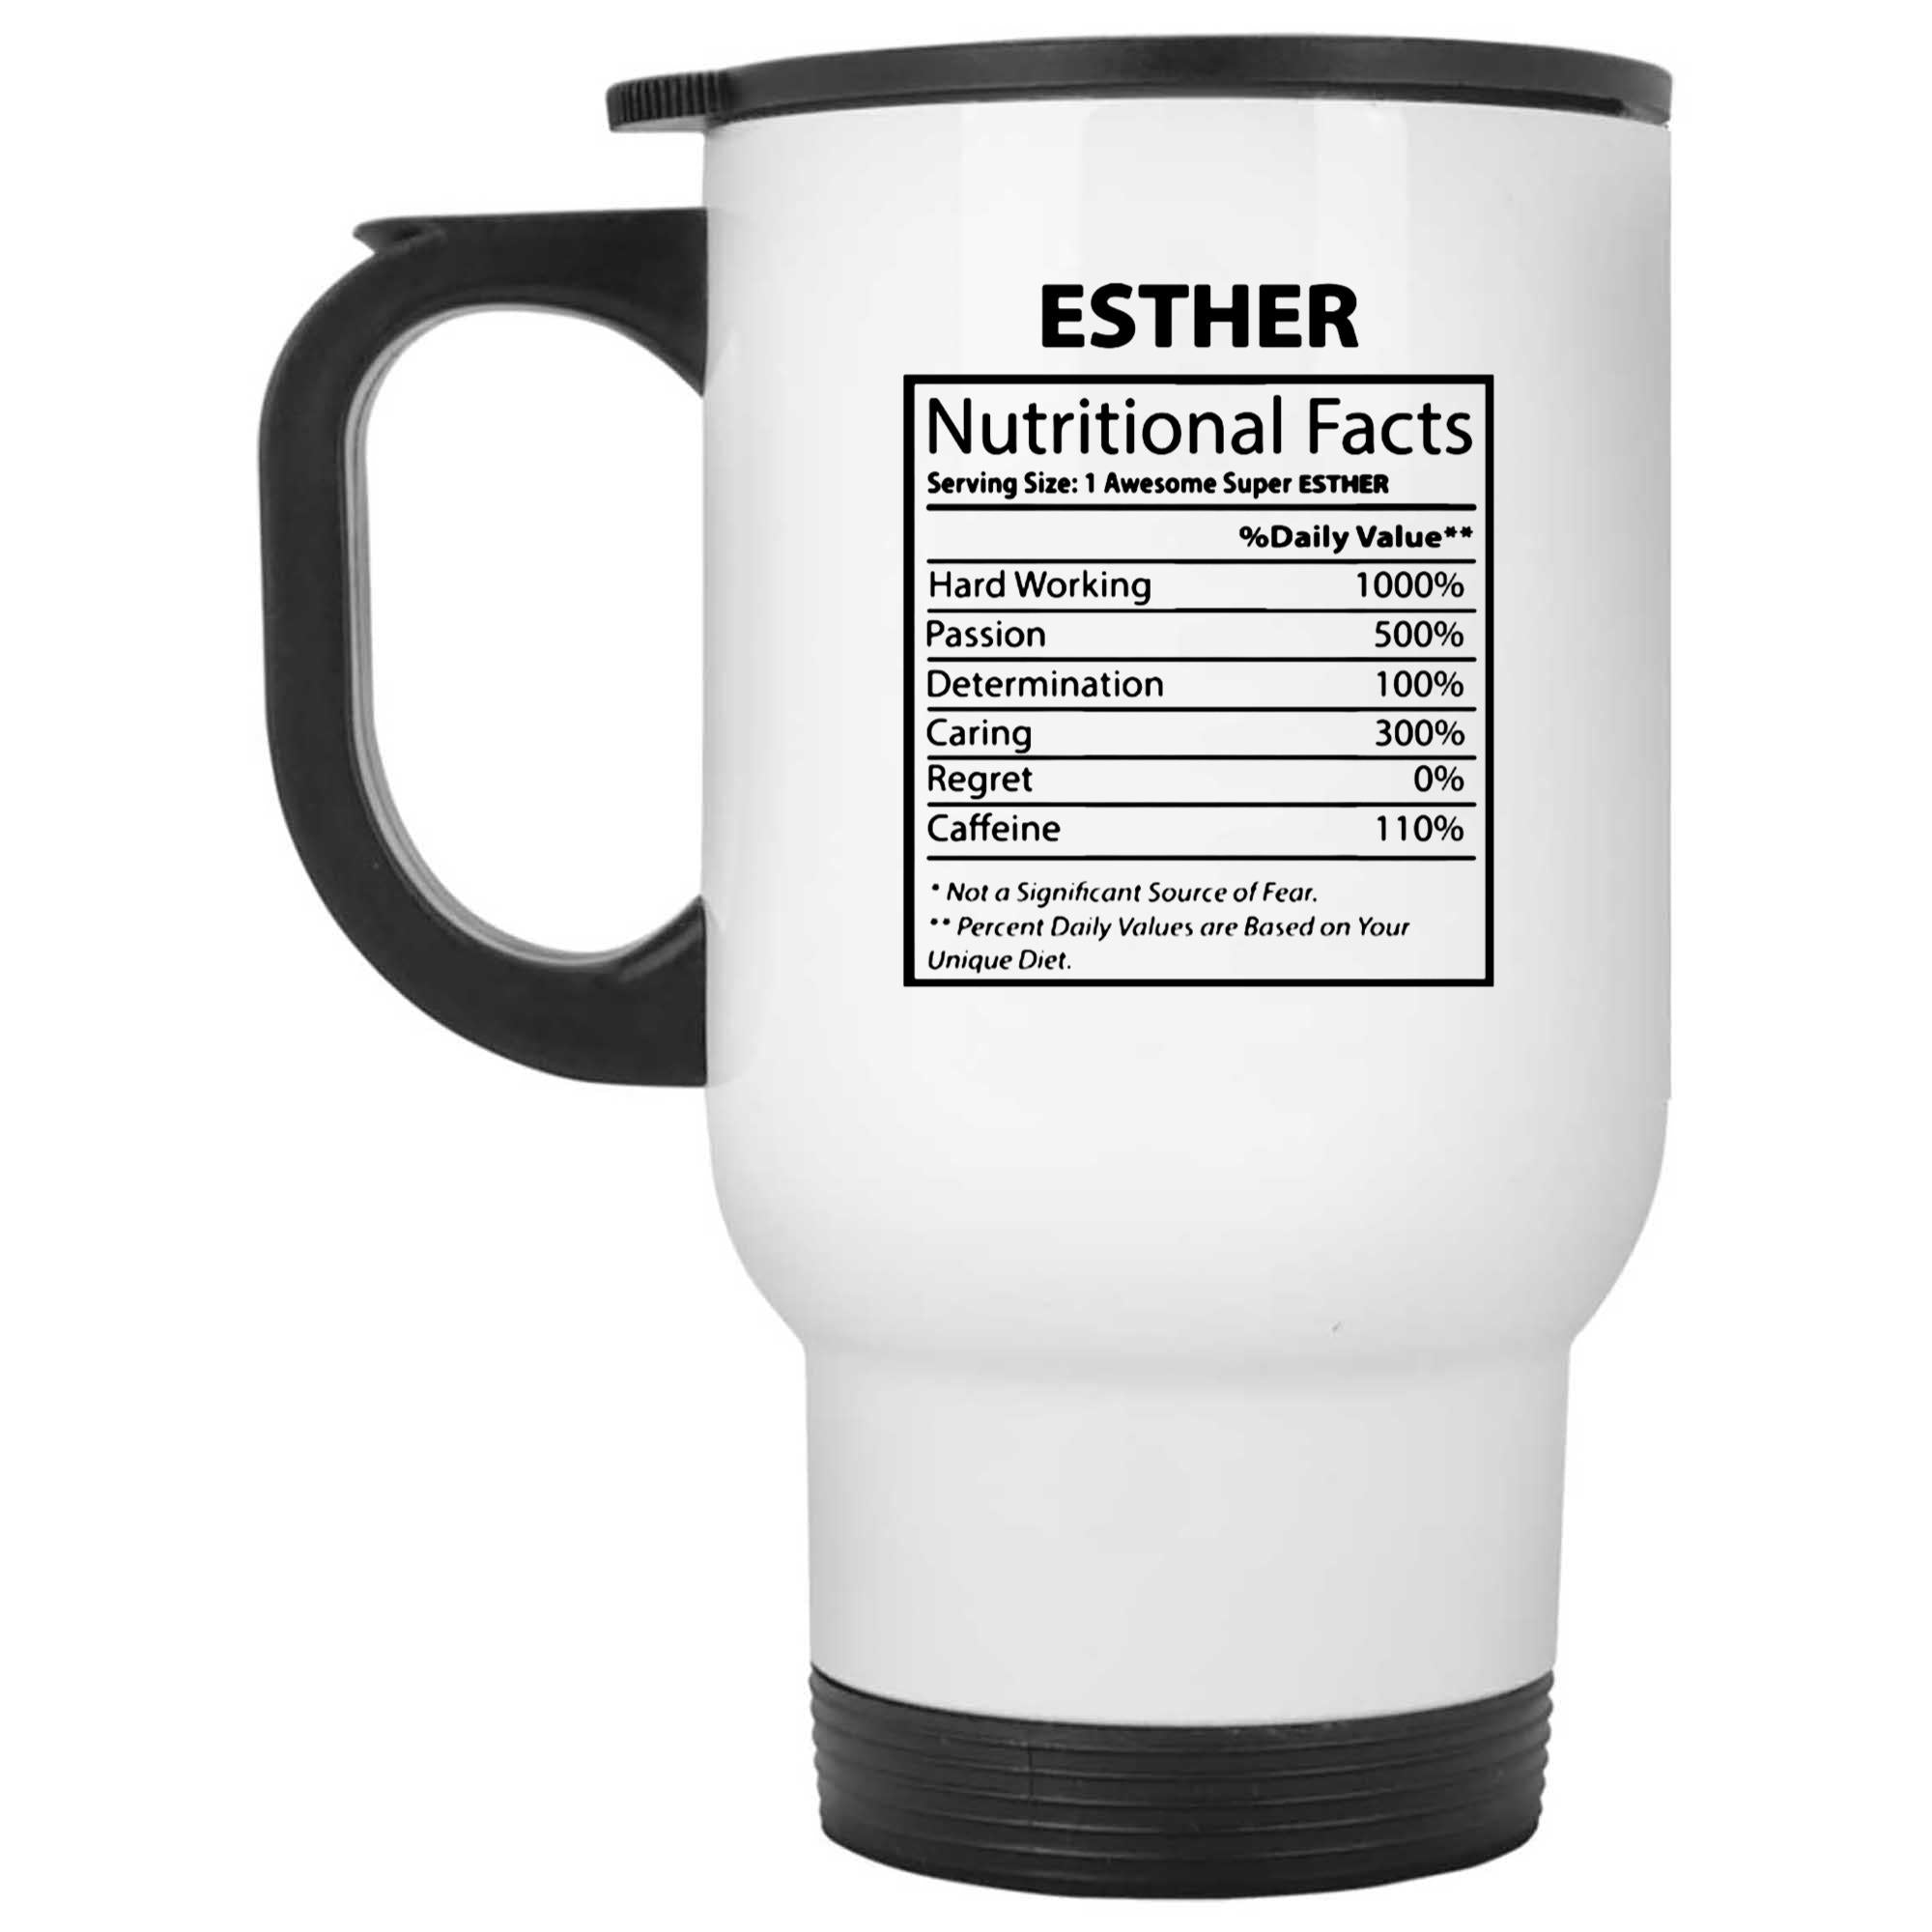 Skitongifts Funny Ceramic Novelty Coffee Mug Esther Nutritional Facts Custom For Esther On Weding Aniversary MM2yphu